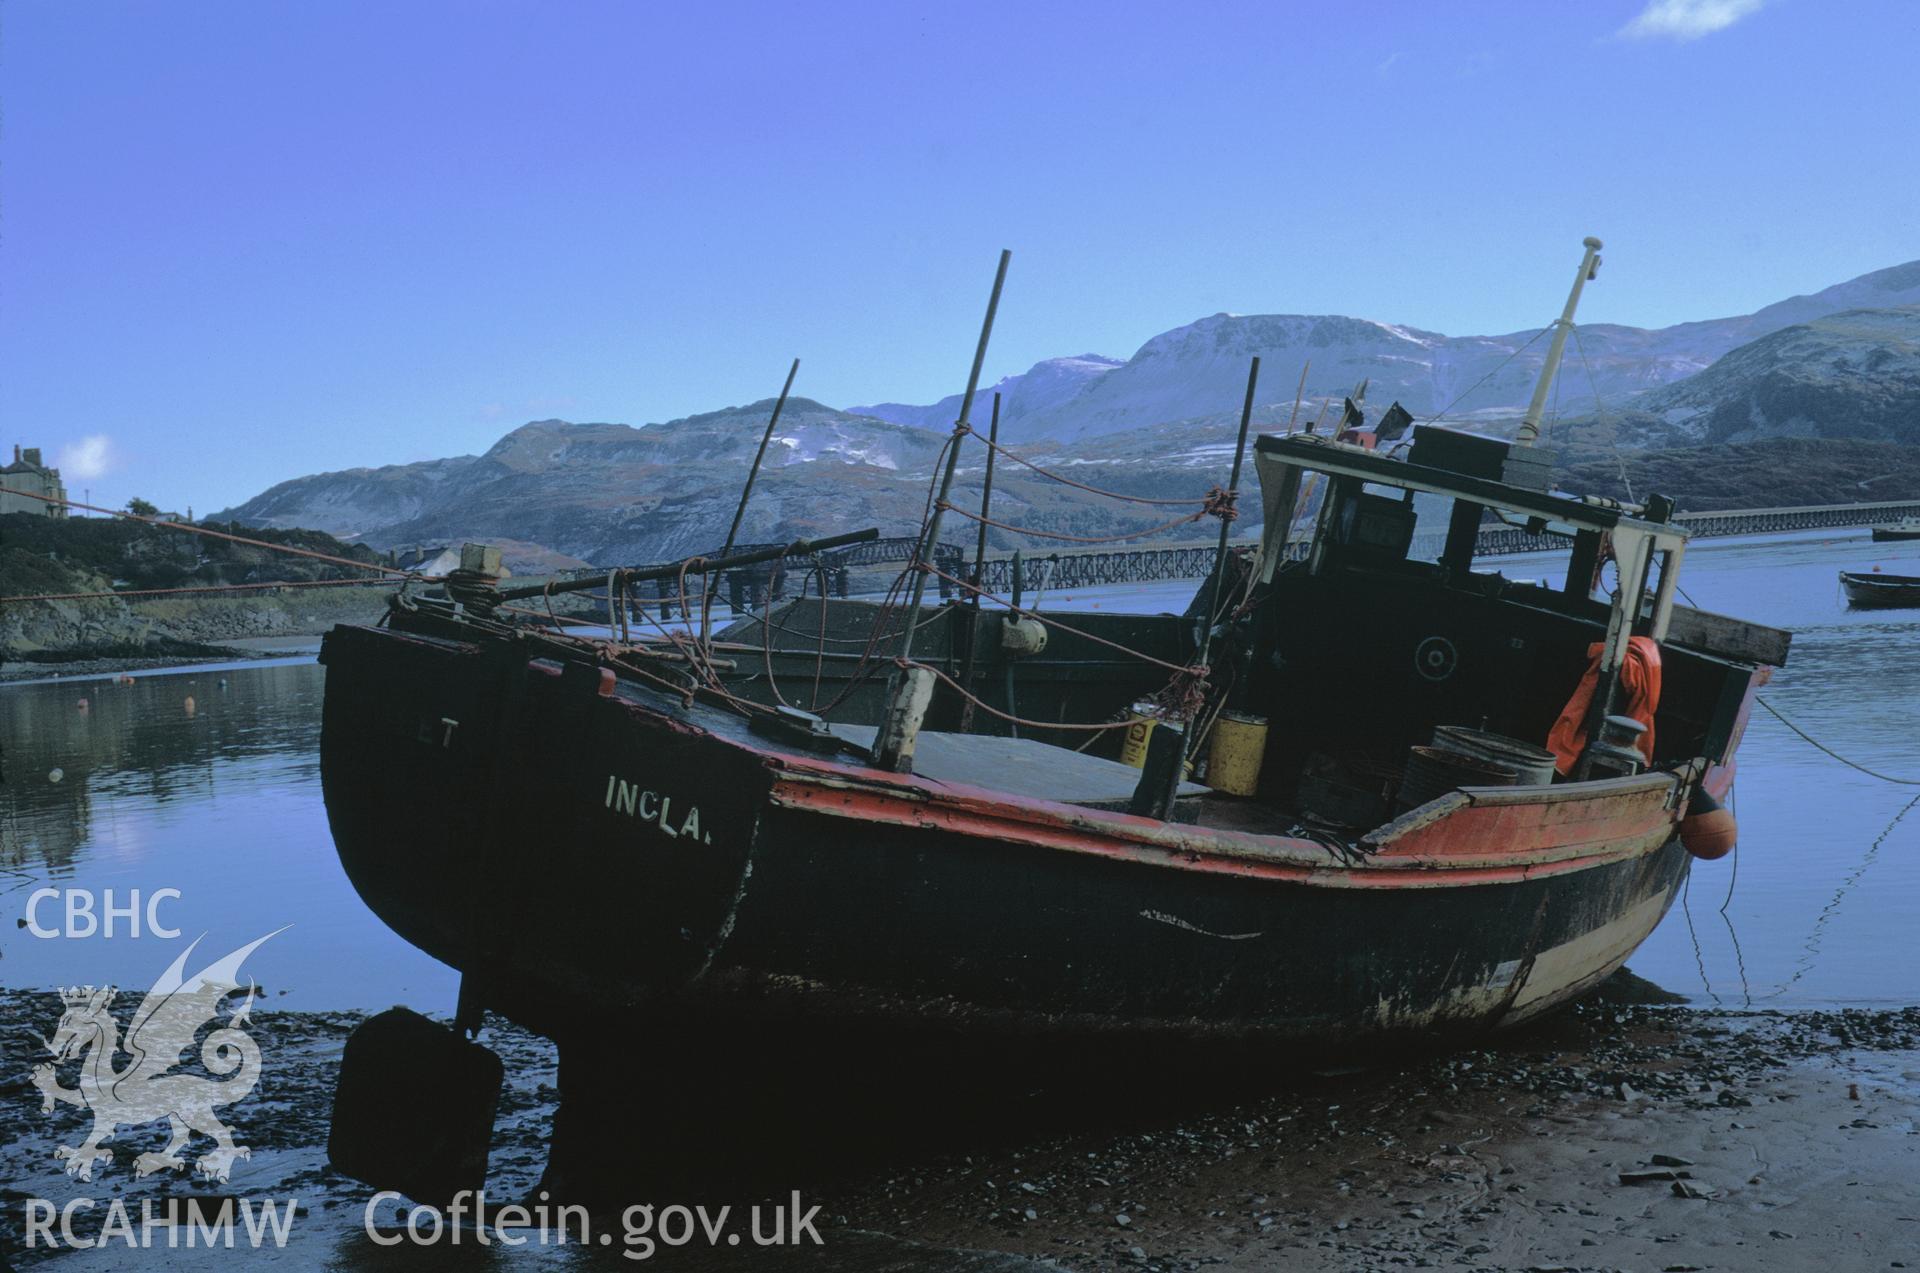 35mm colour slide showing a fishing boat in Barmouth Harbour, Merionethshire, by Dylan Roberts.